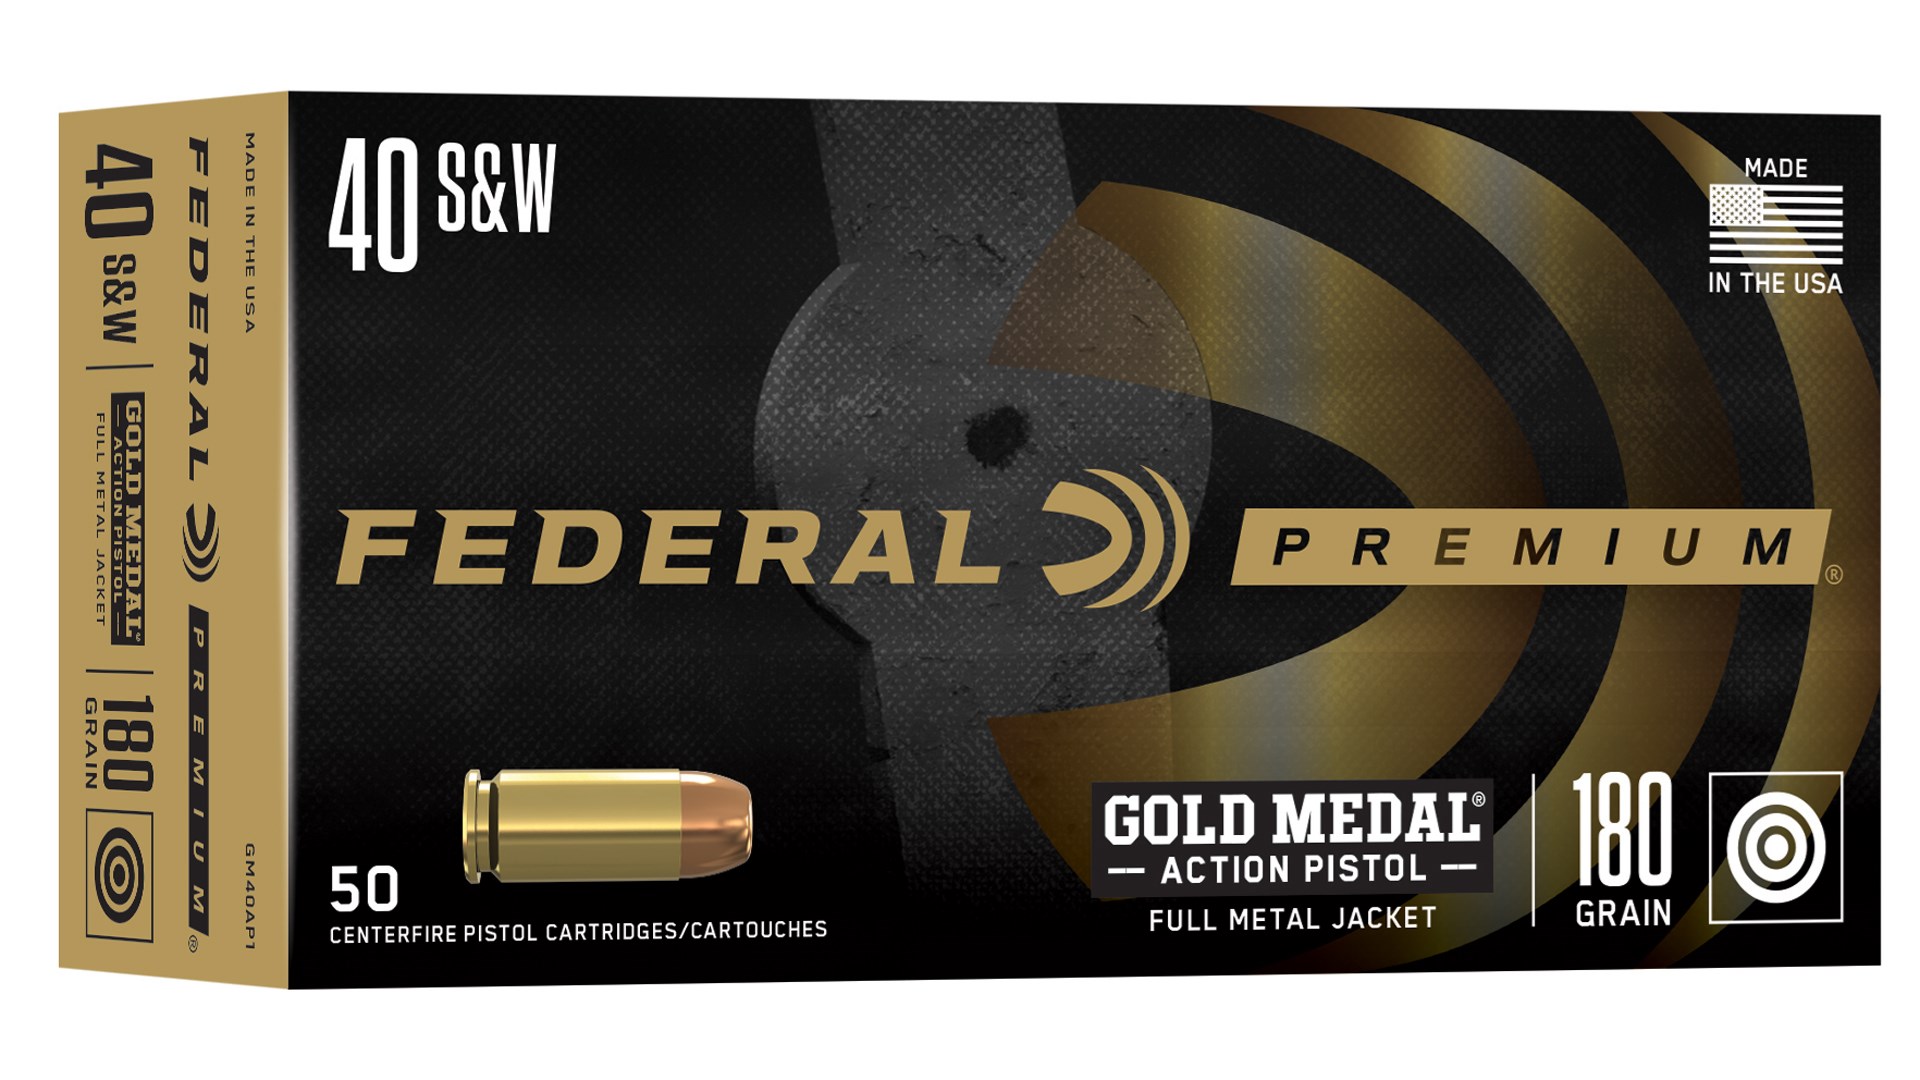 Federal Premium ammunition box Gold Medal Action Pistol 40 S&W ammo packaging new product announcement SHOT Show 2023